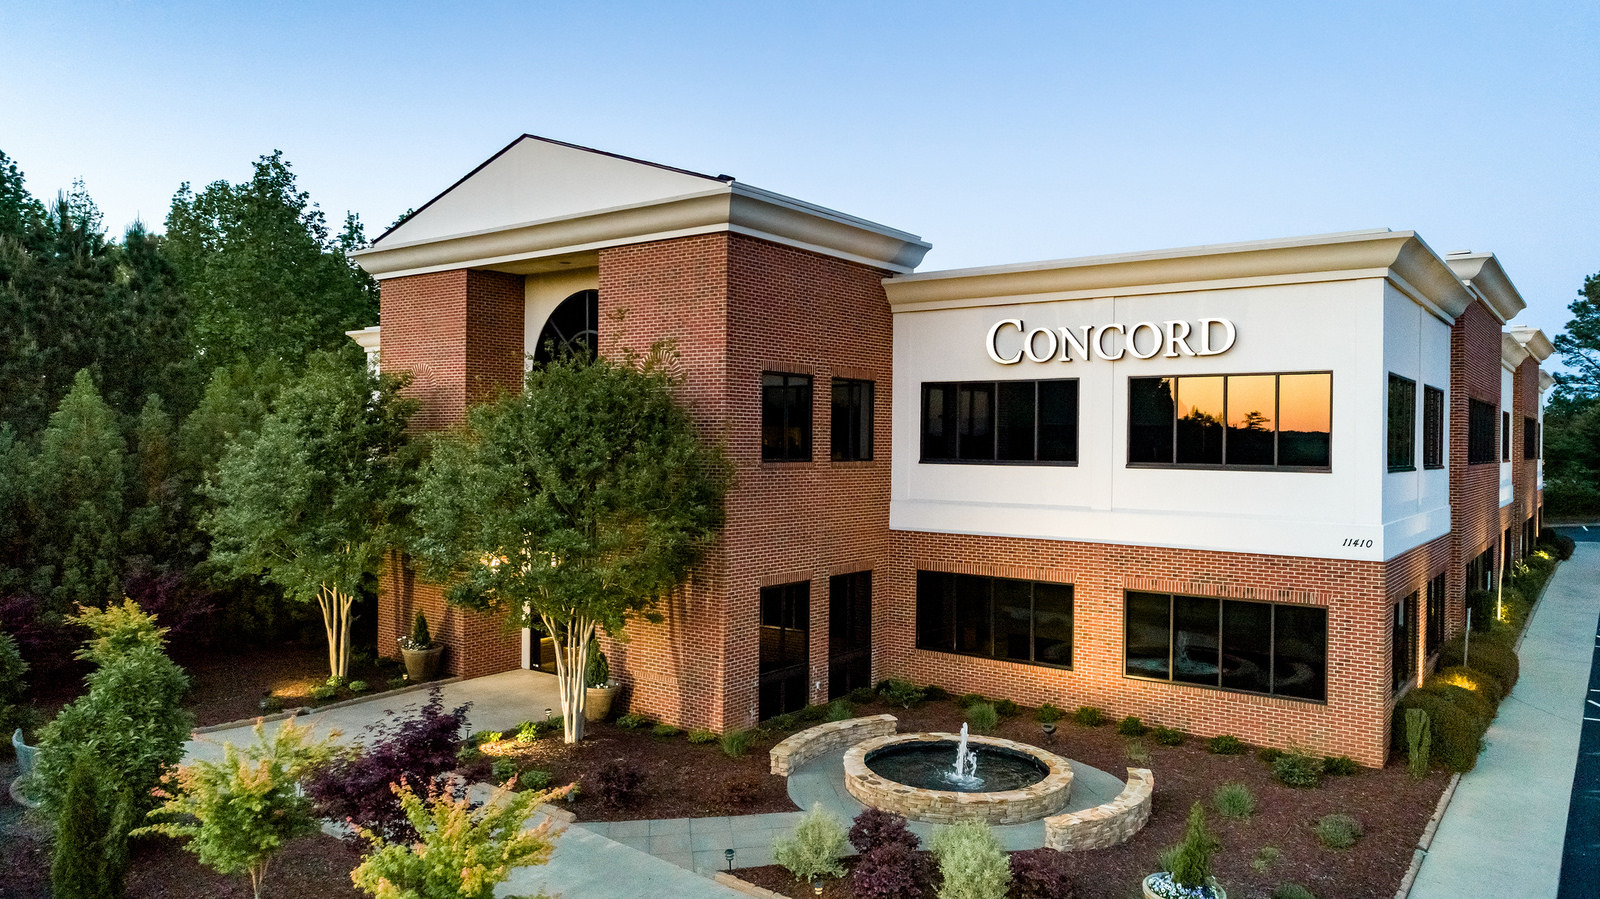 Photo of Concord Hospitality Enterprises, Raleigh, NC